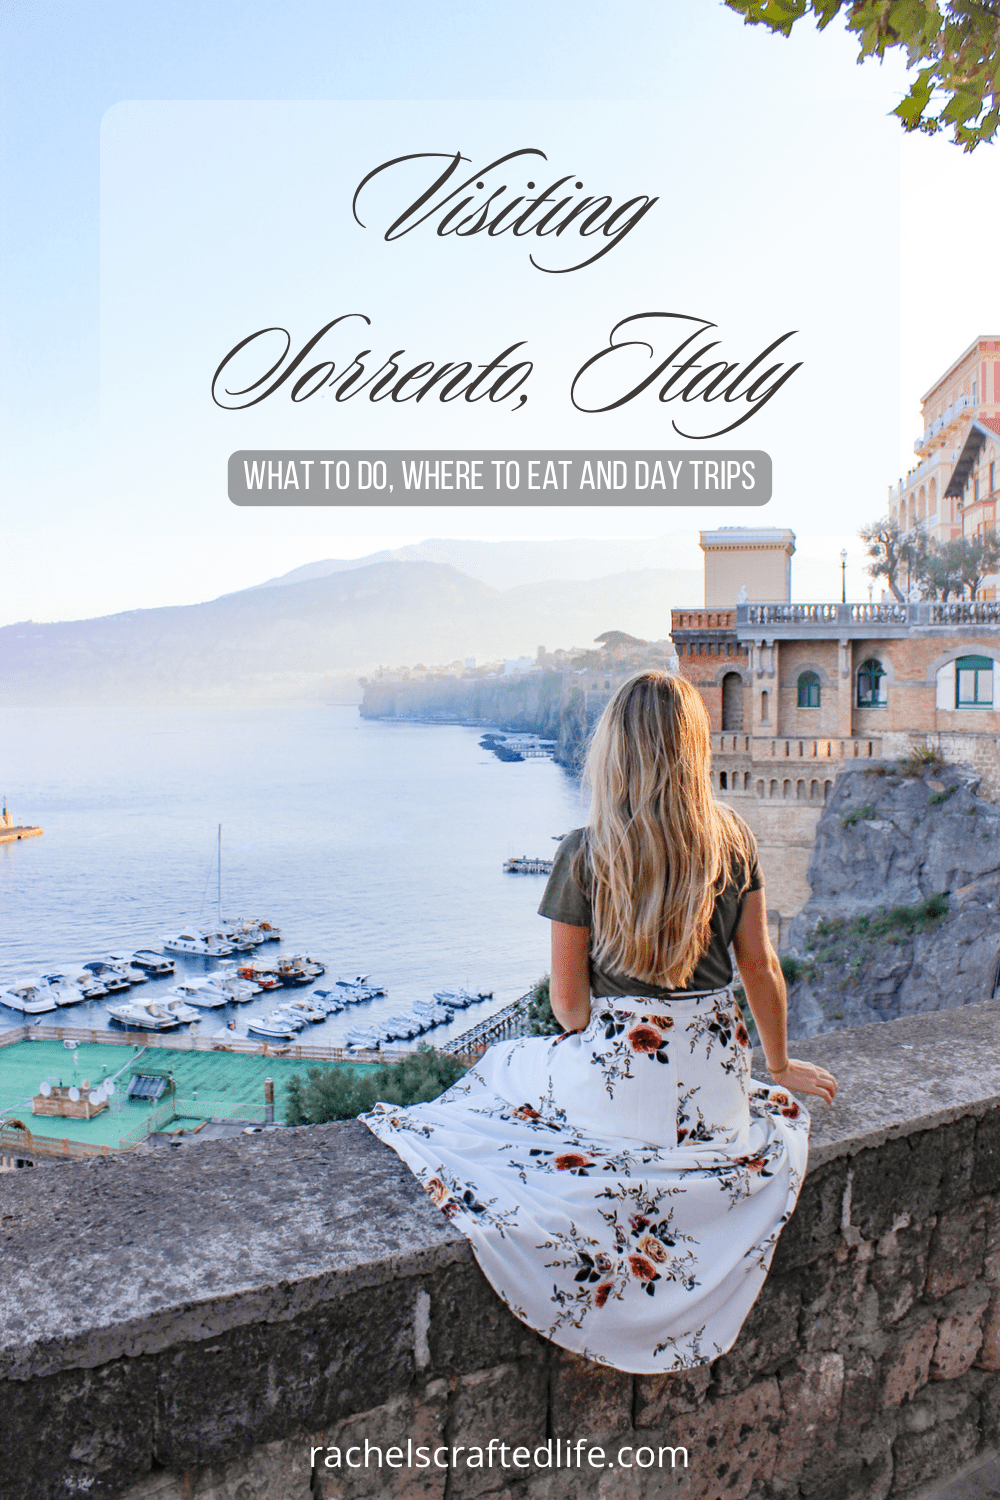 You are currently viewing 9 Things You Can’t Miss in Sorrento, Italy